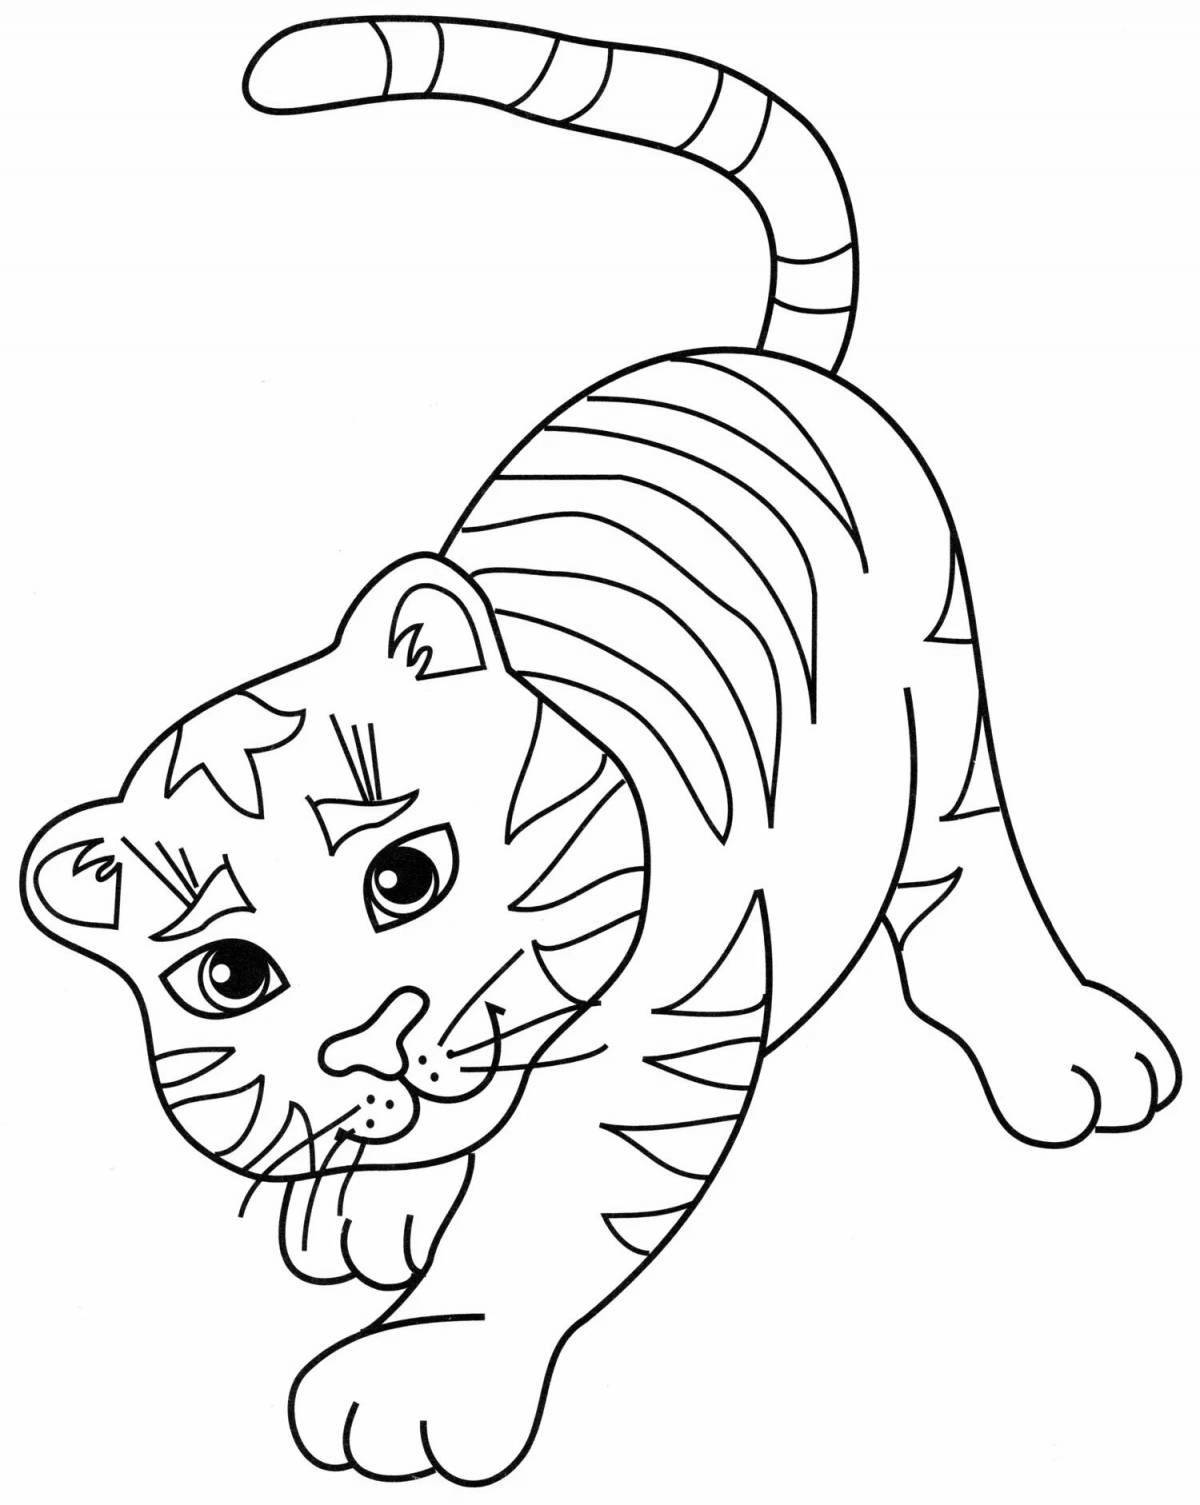 Exquisite tigress coloring page